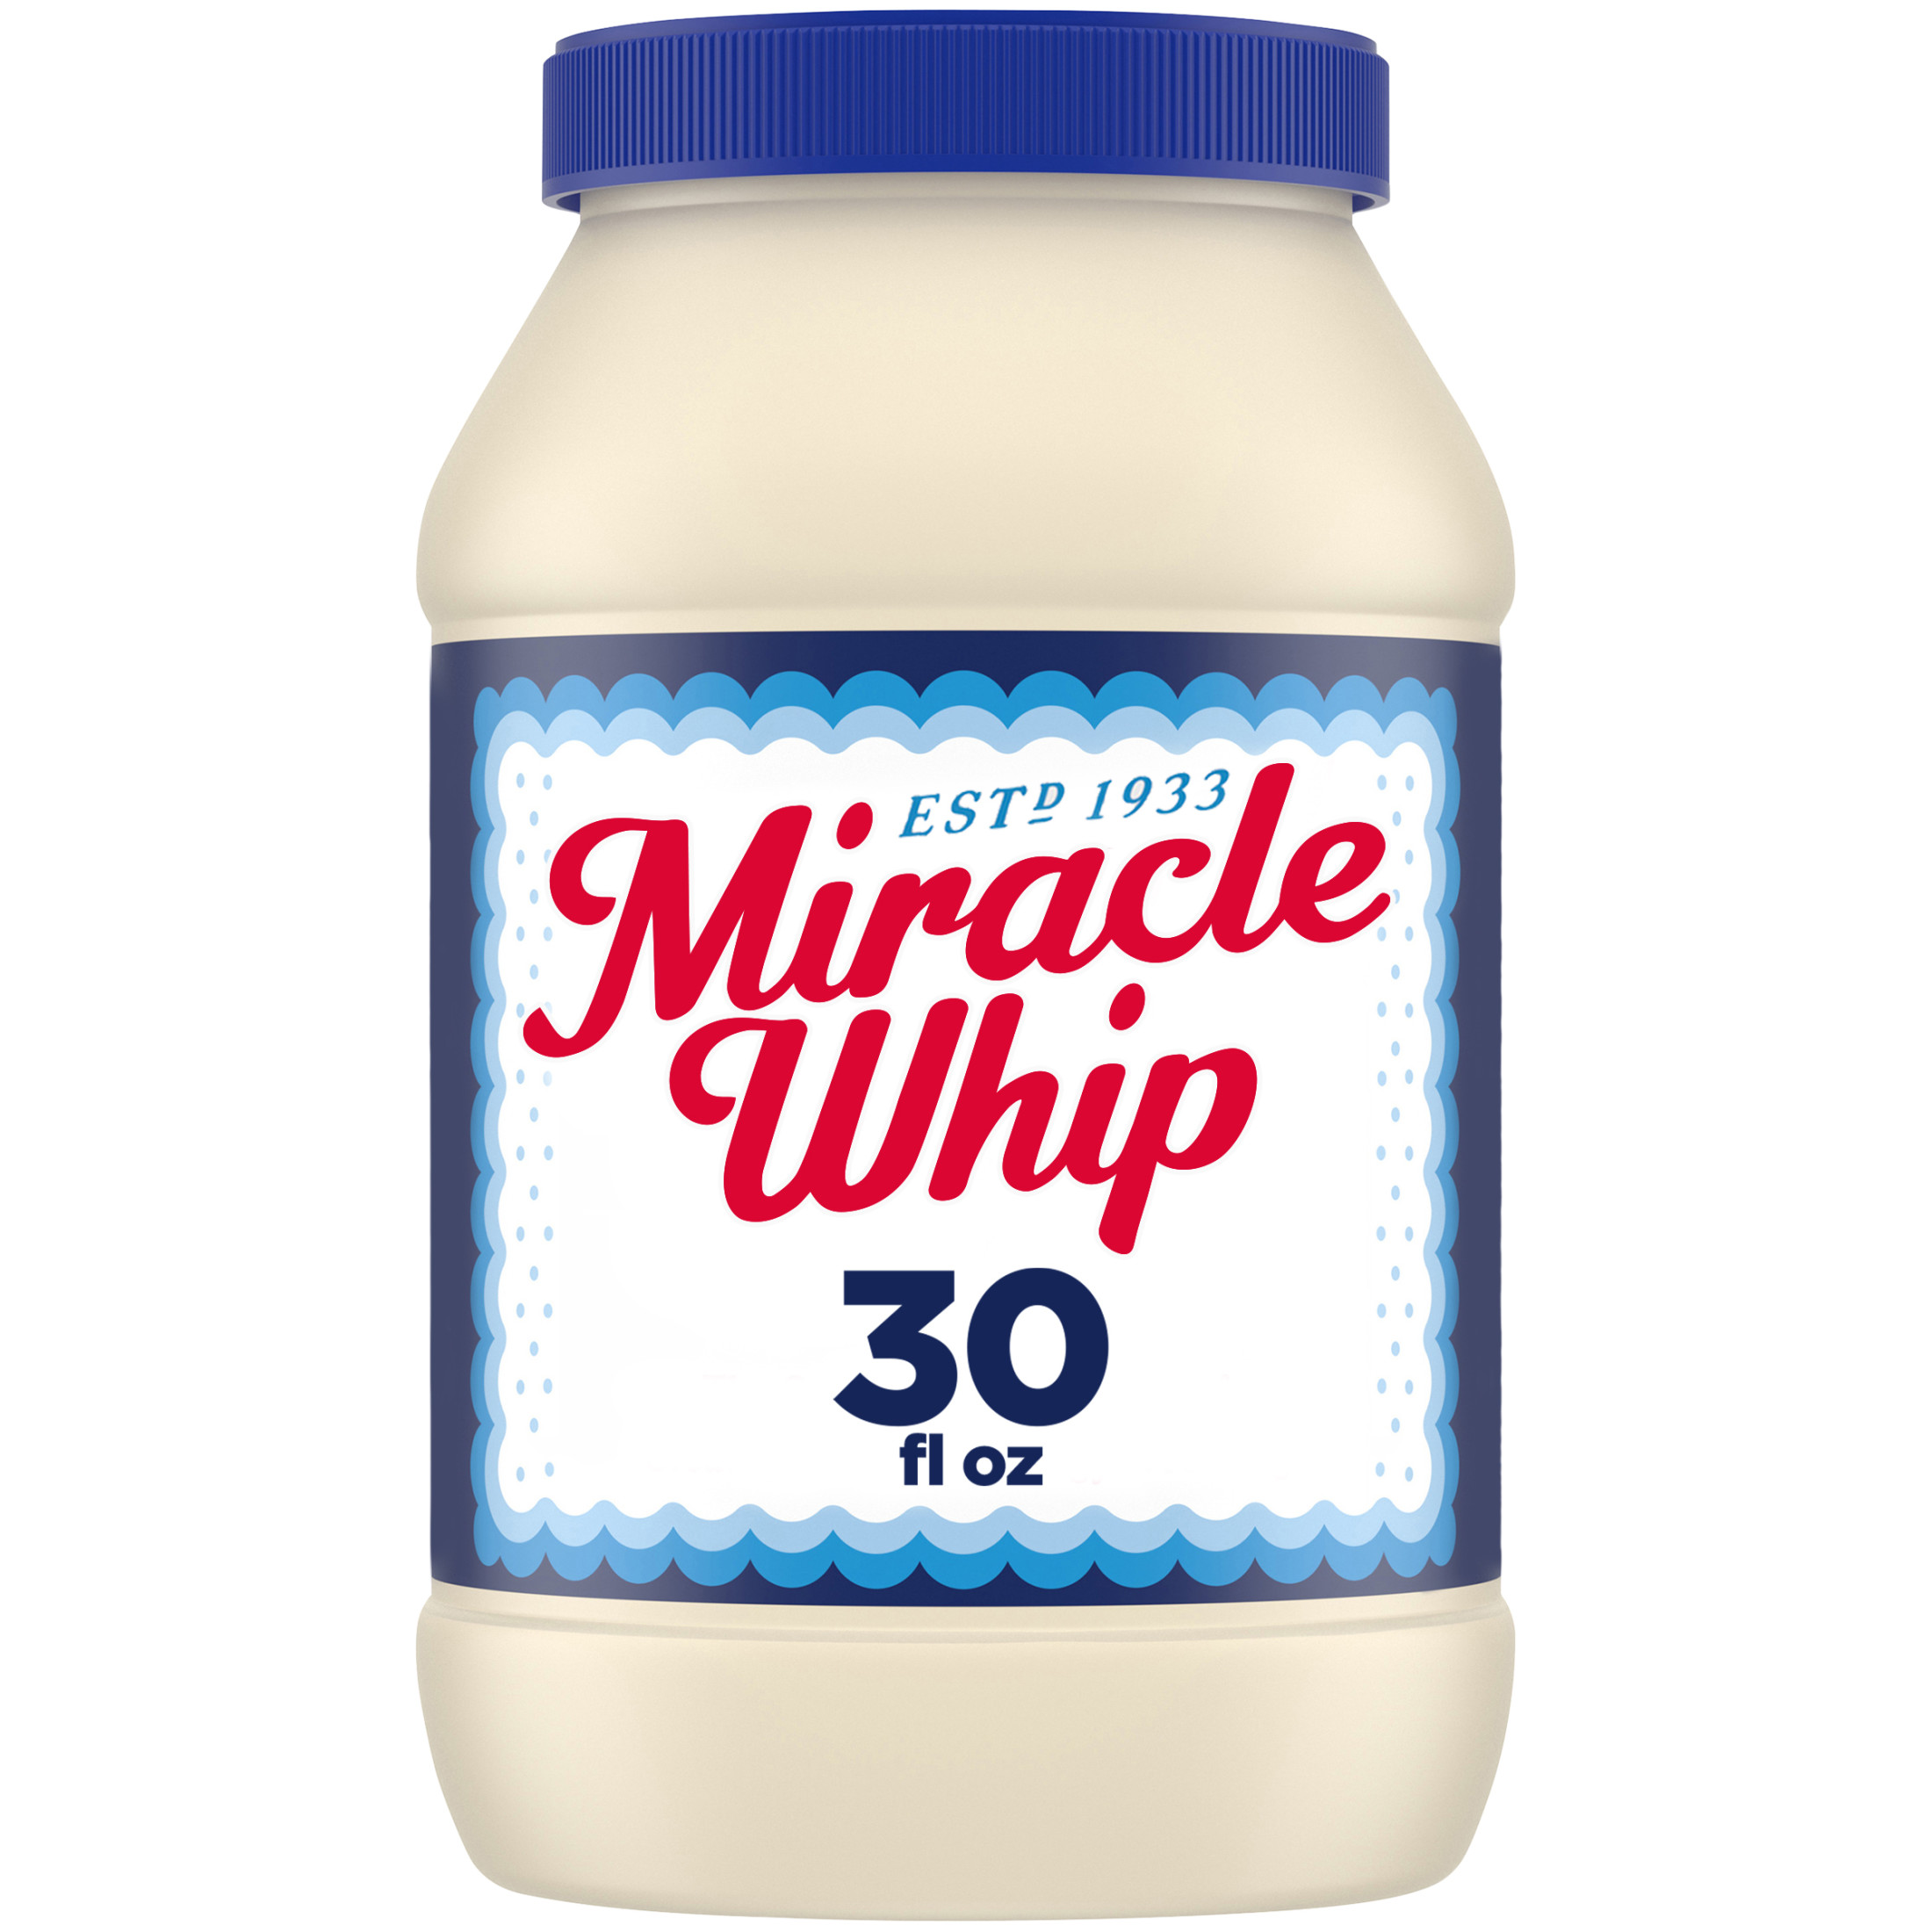 Miracle Whip Mayo-like Dressing, for a Keto and Low Carb Lifestyle, 30 fl oz Jar - image 1 of 16